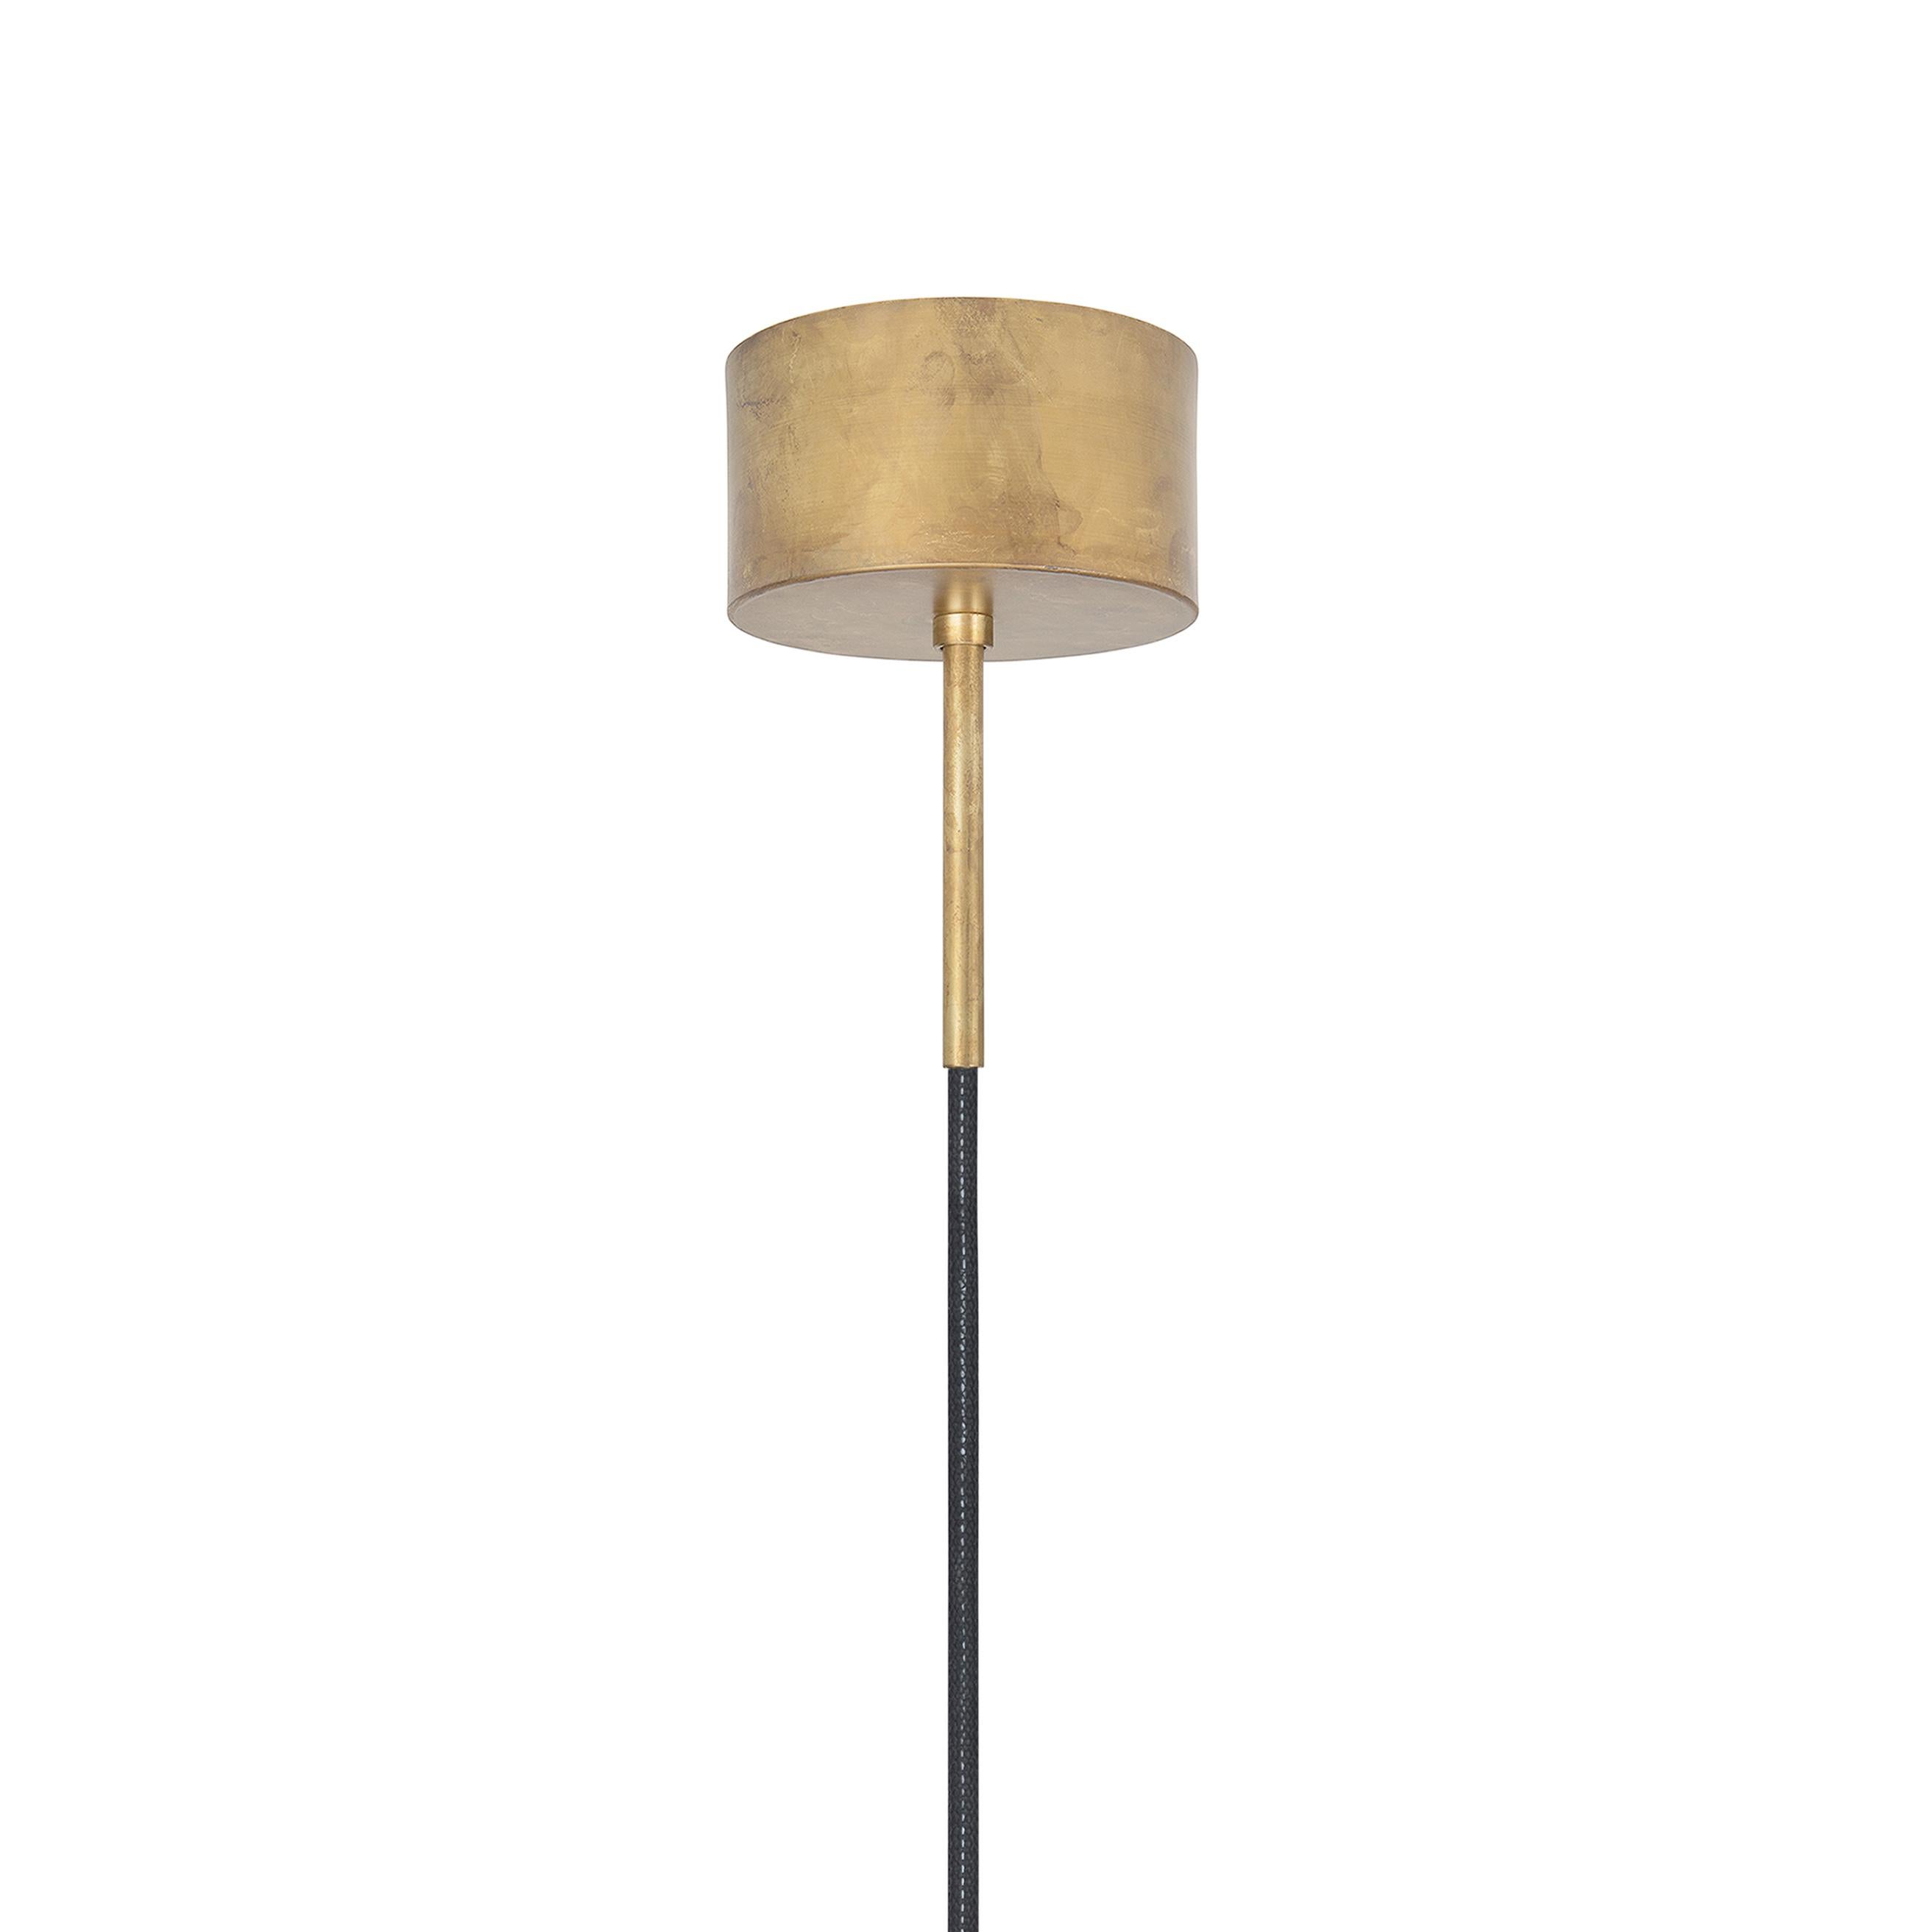 Ceiling lamp model Klyfta designed by Johan Carpner and manufactured by Konsthantverk.

The production of lamps, wall lights and floor lamps are manufactured using craftsman’s techniques with the same materials and techniques as the first